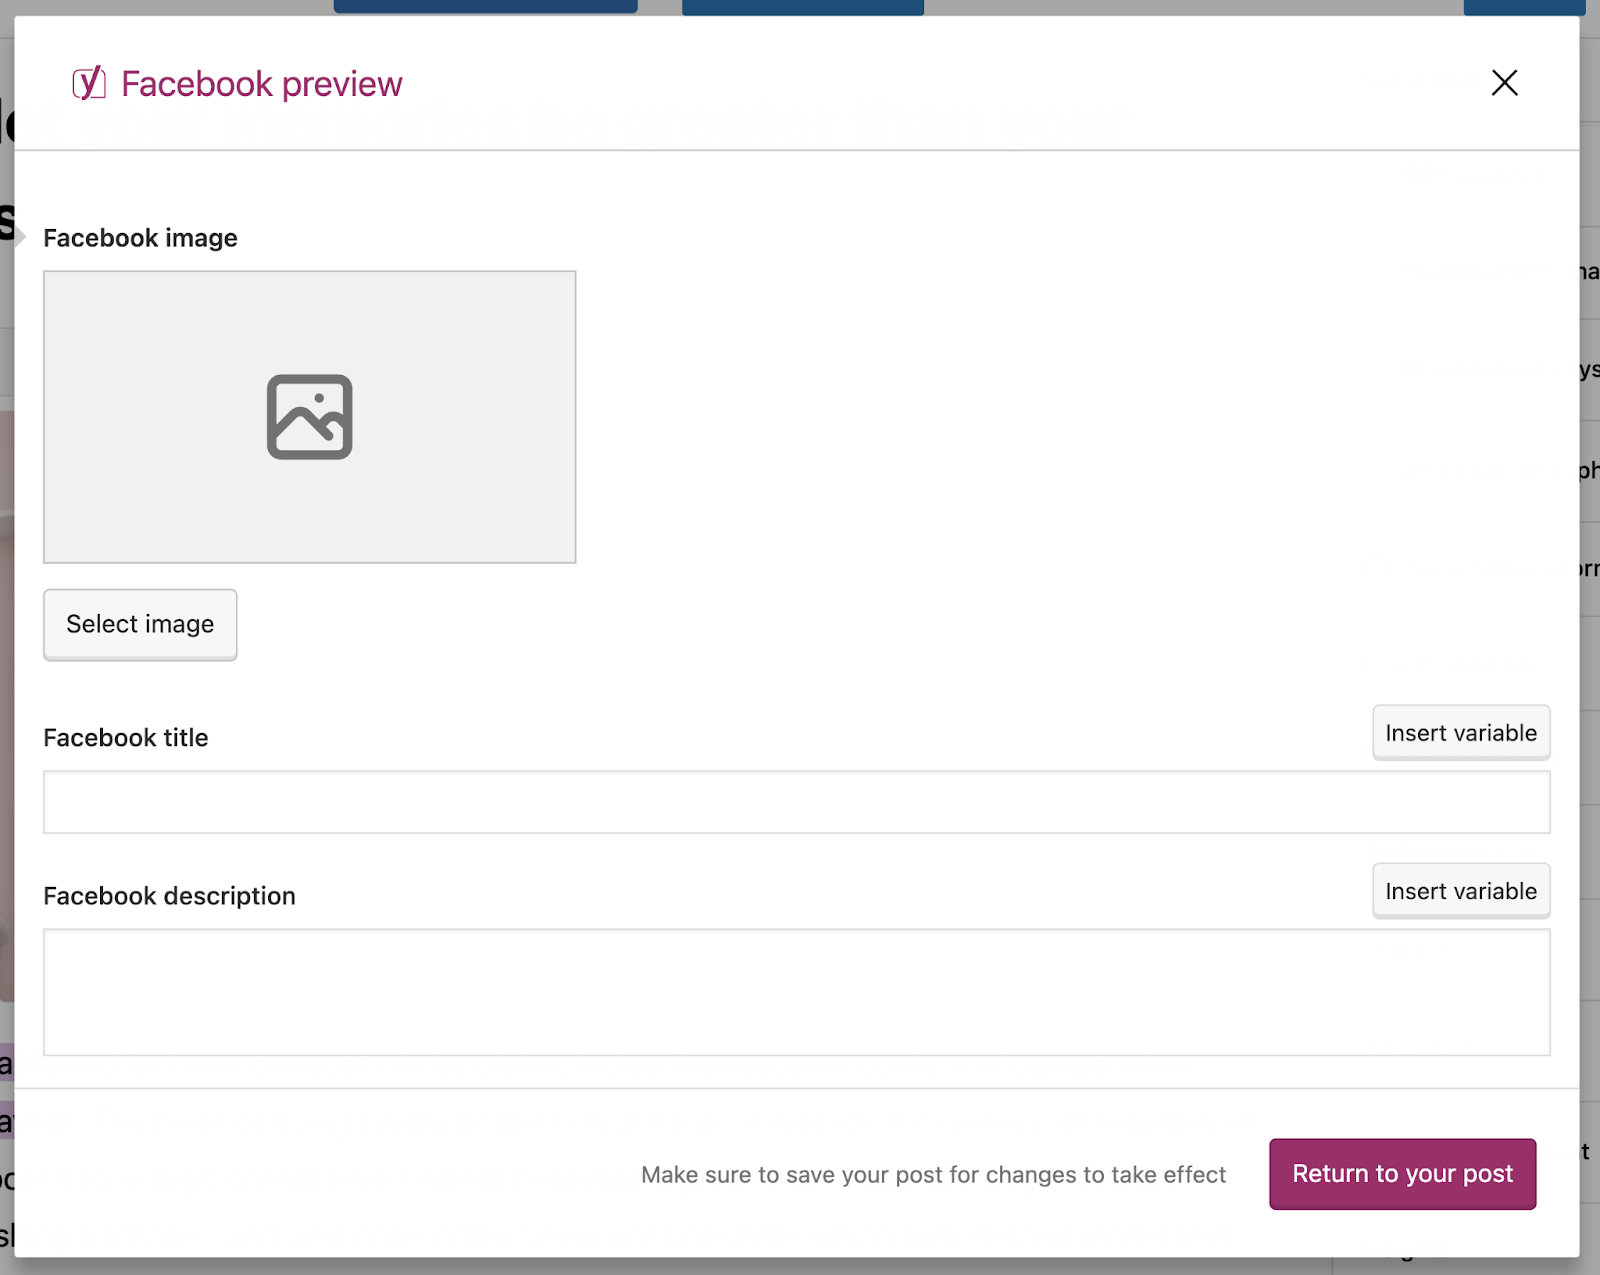 Facebook preview overview